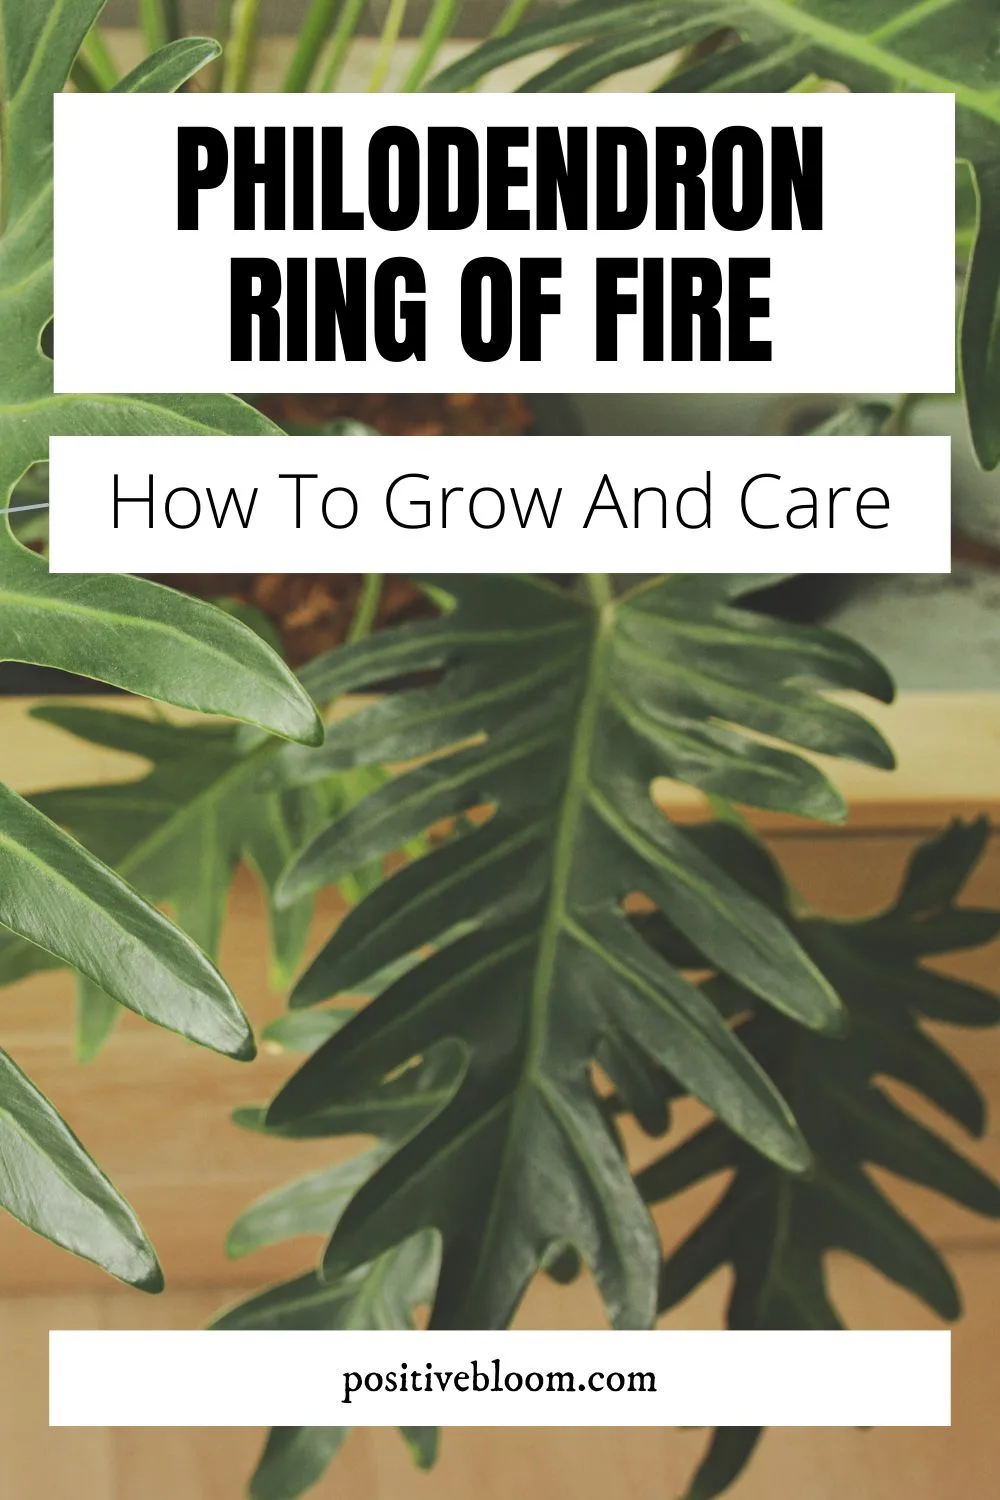 How To Grow And Care For The Philodendron Ring Of Fire Pinterest